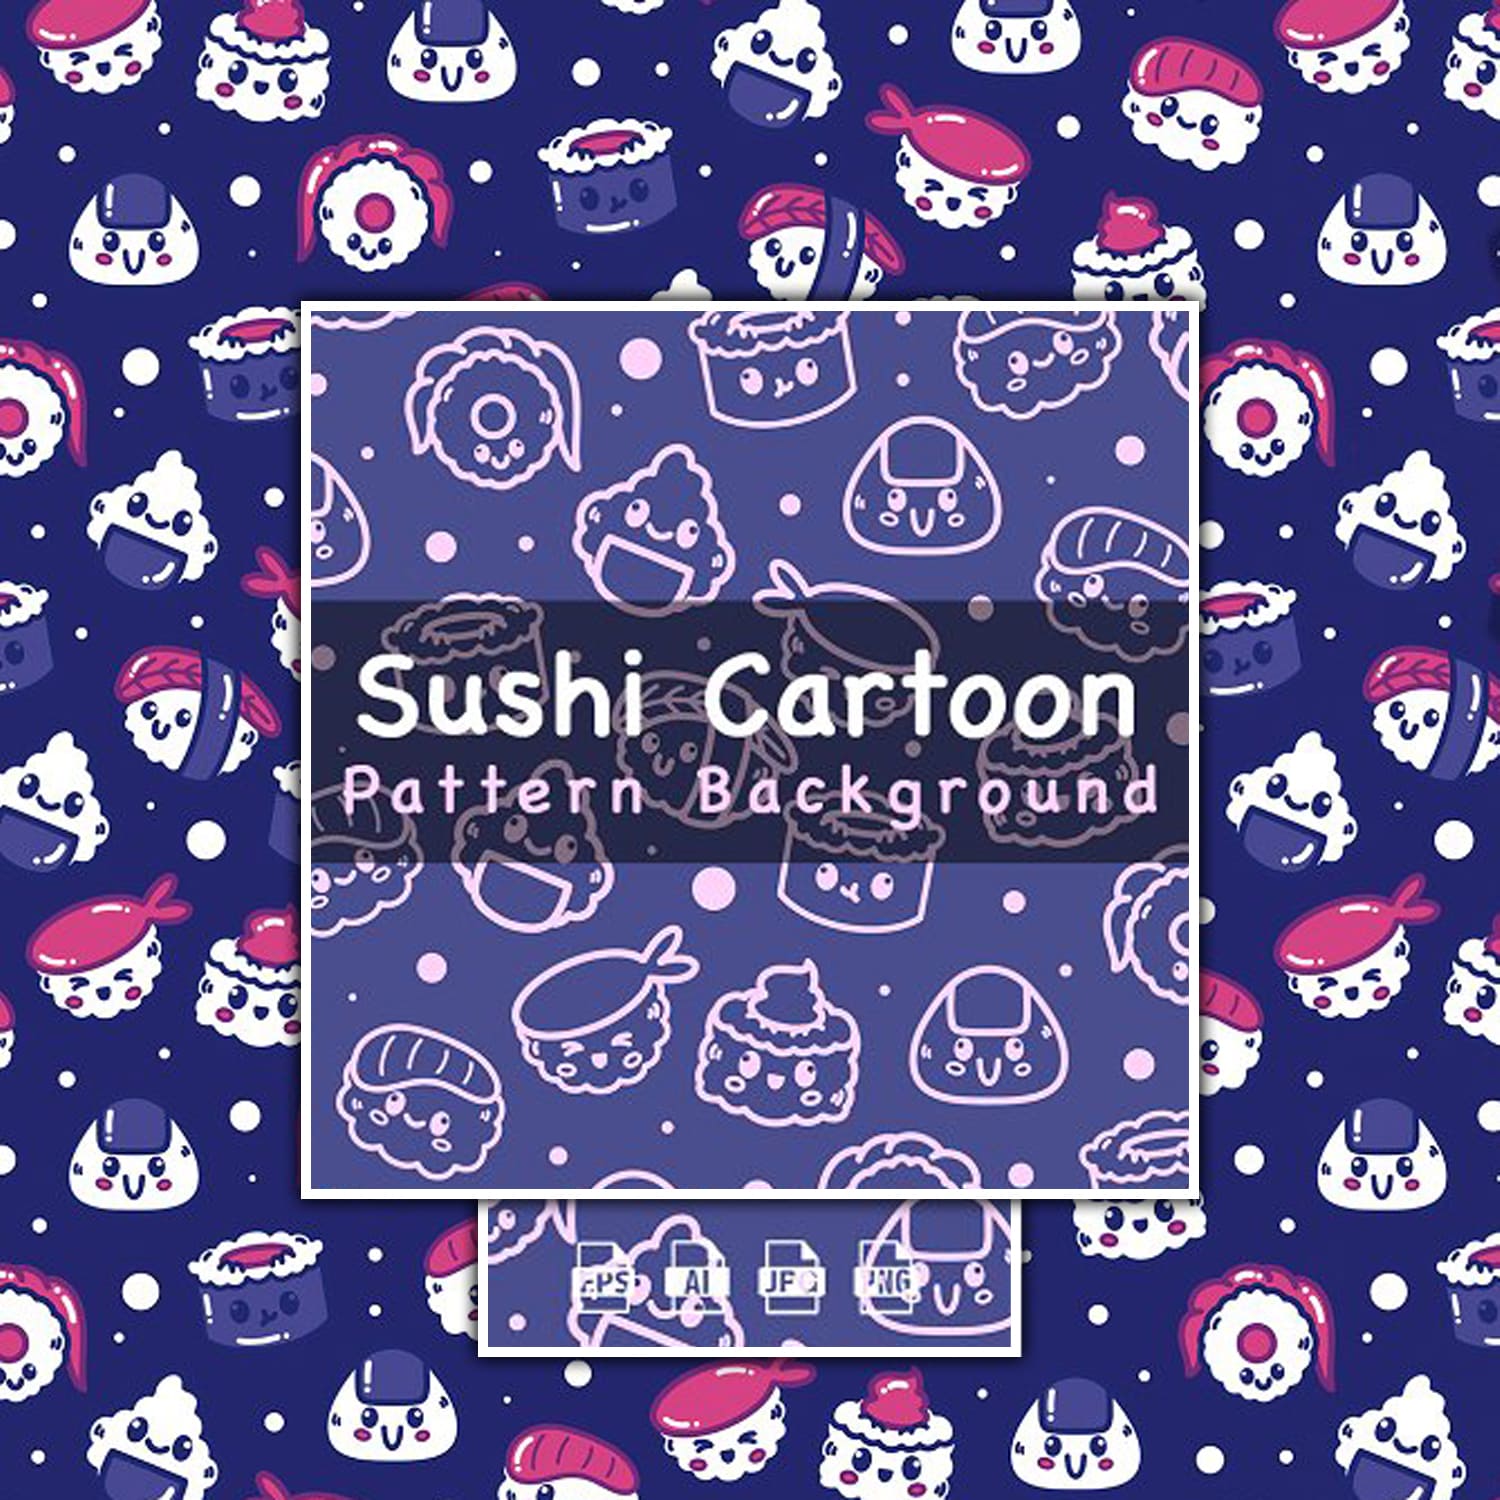 Pattern Background - Sushi Cartoon cover.